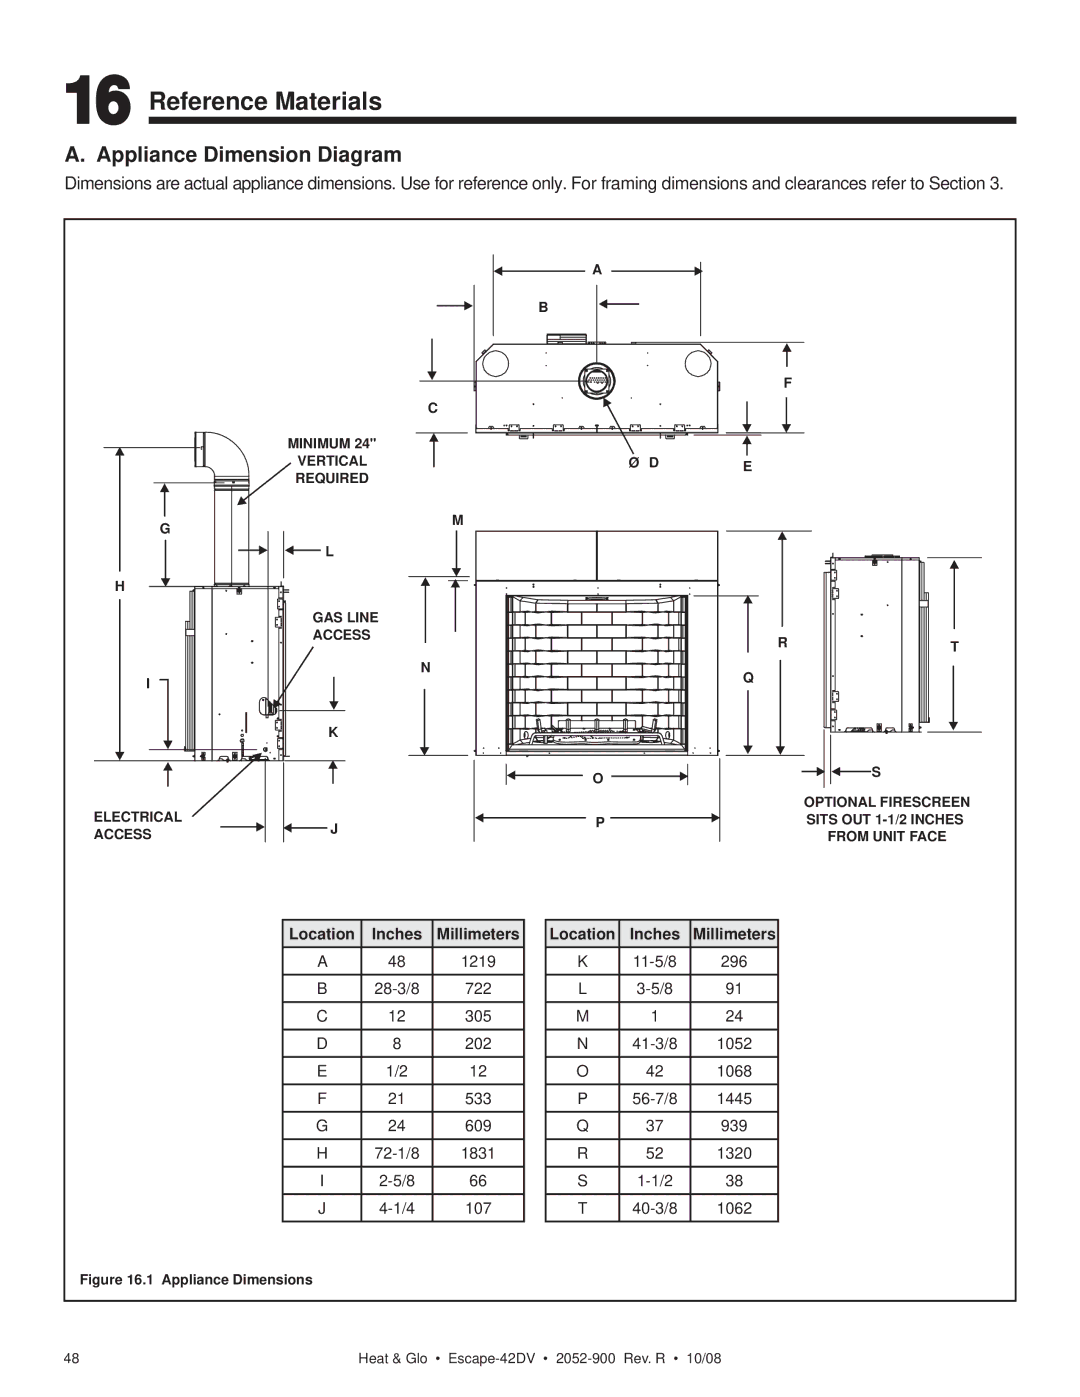 Hearth and Home Technologies ESCAPE-42DV Reference Materials, Appliance Dimension Diagram, Location Inches Millimeters 